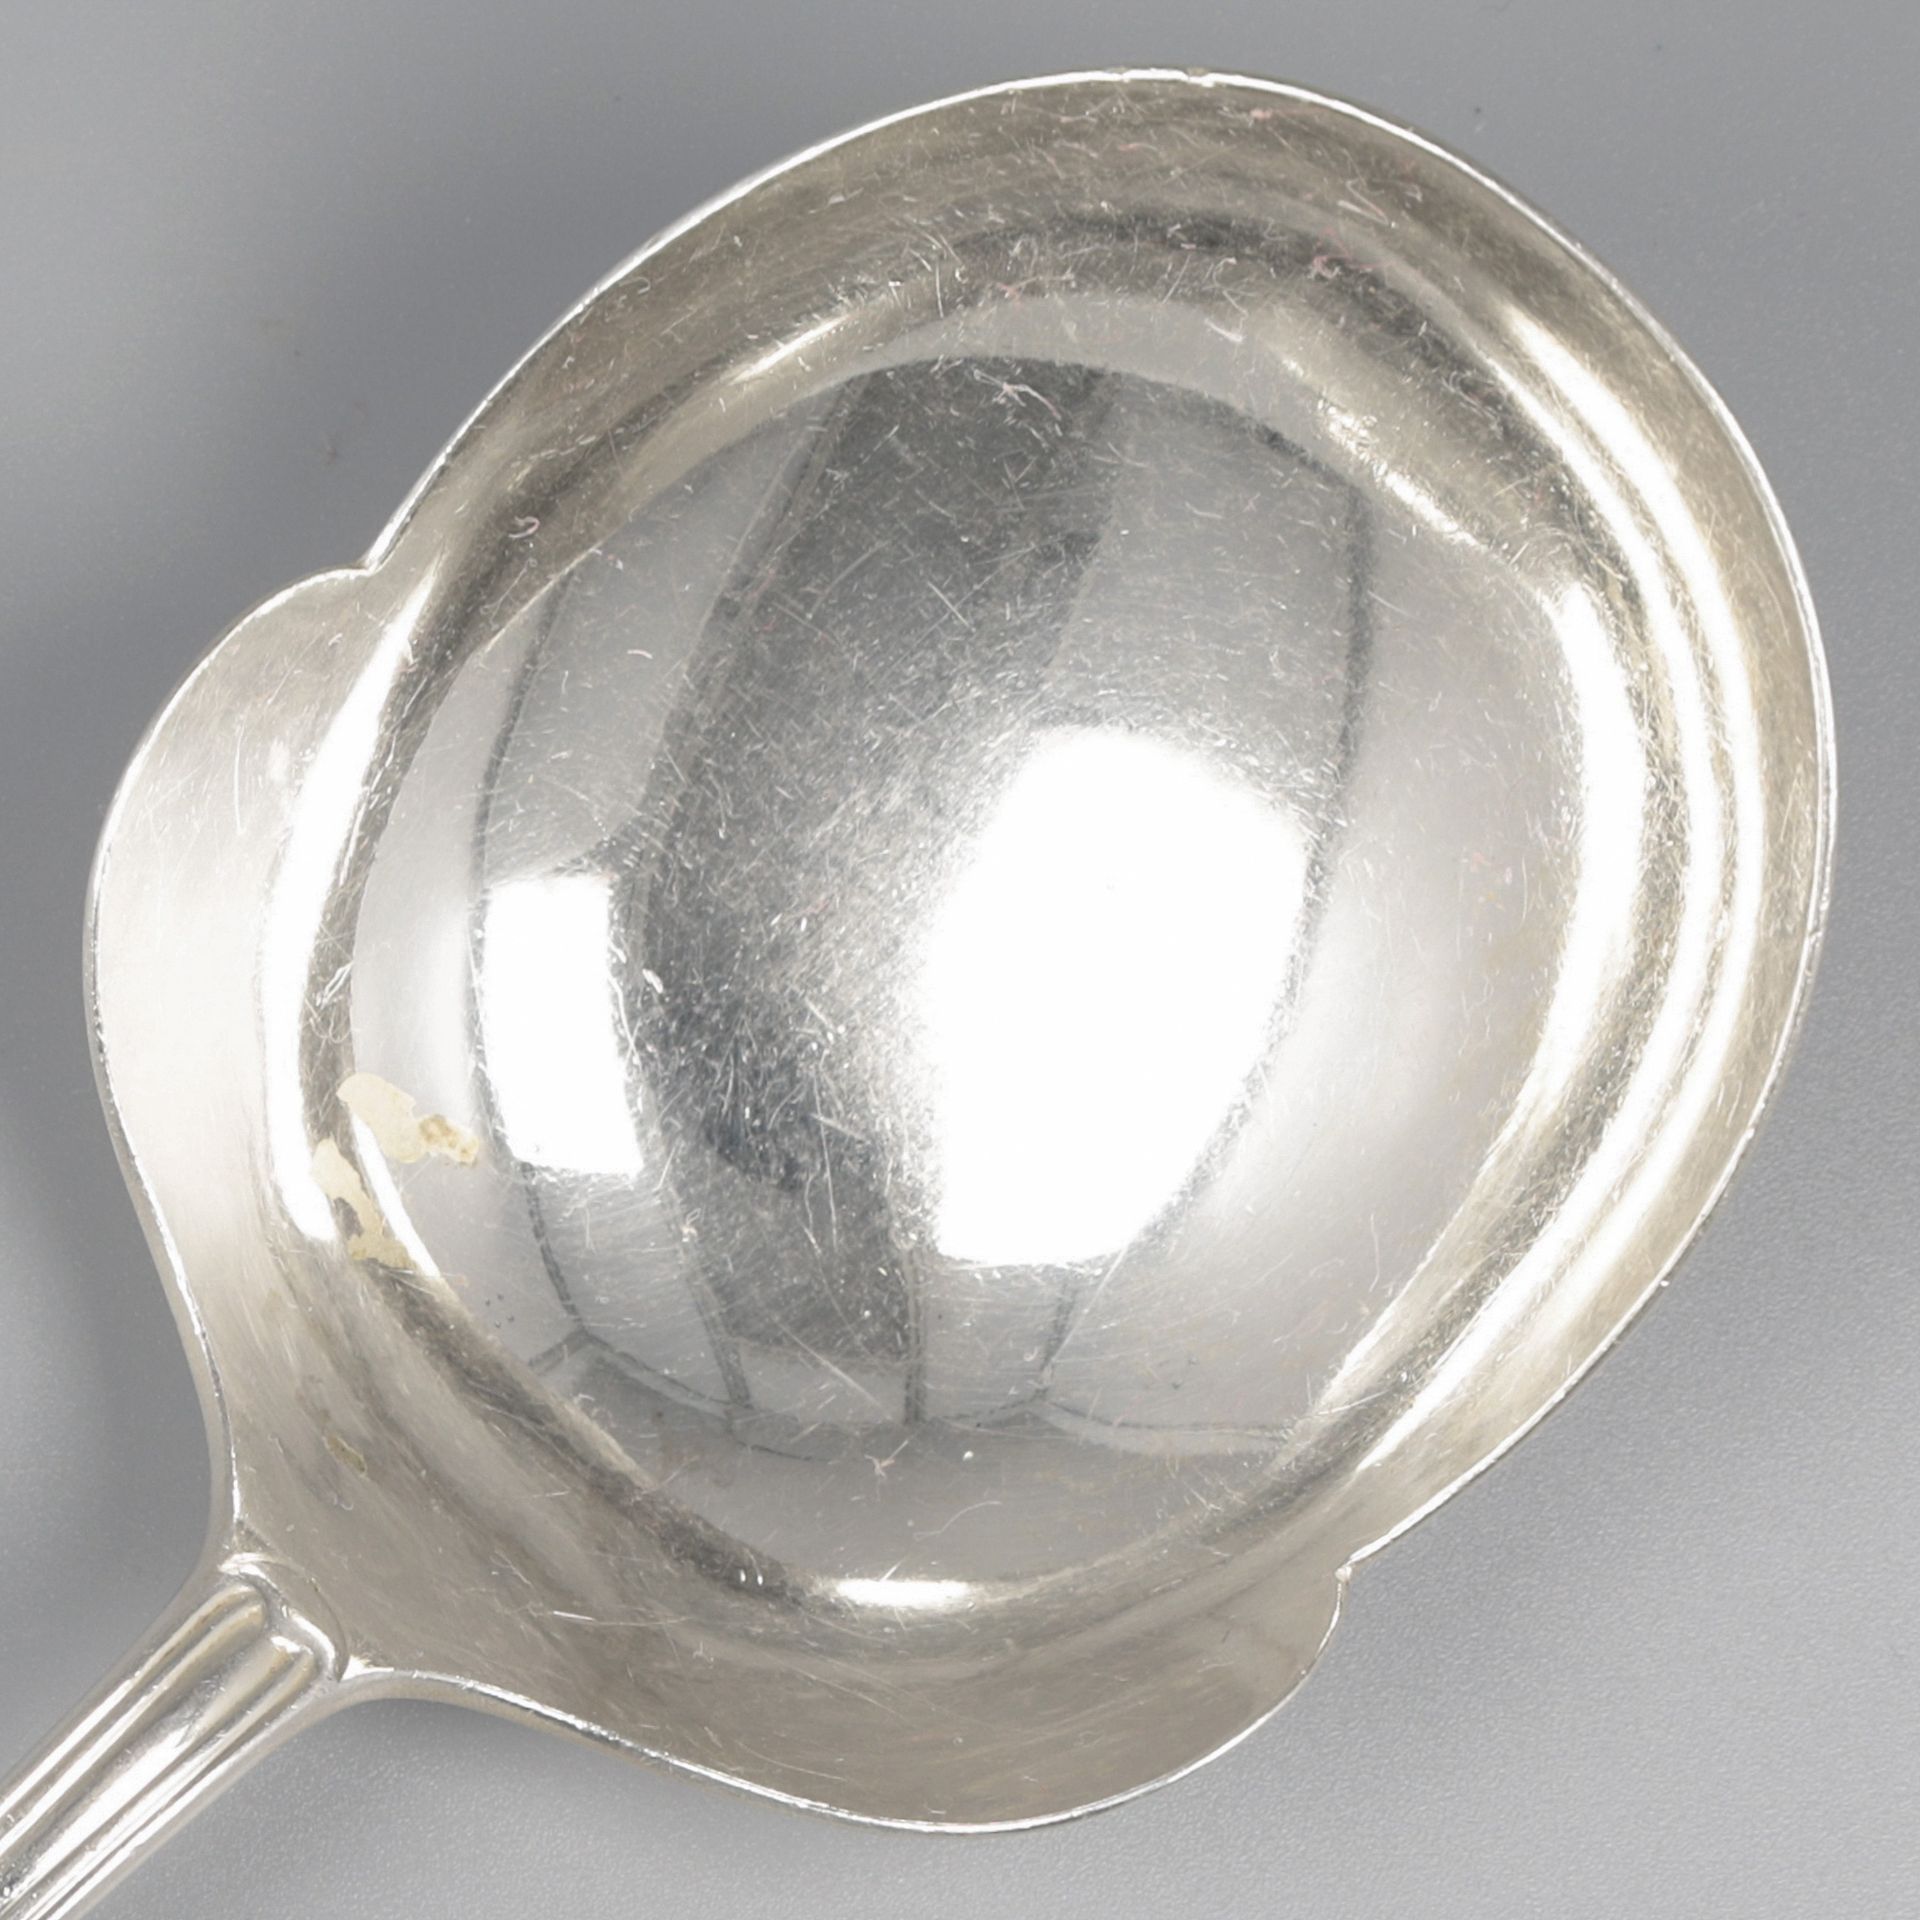 No reserve - Potato serving spoon "Hollands Rondfilet" silver. - Image 3 of 7